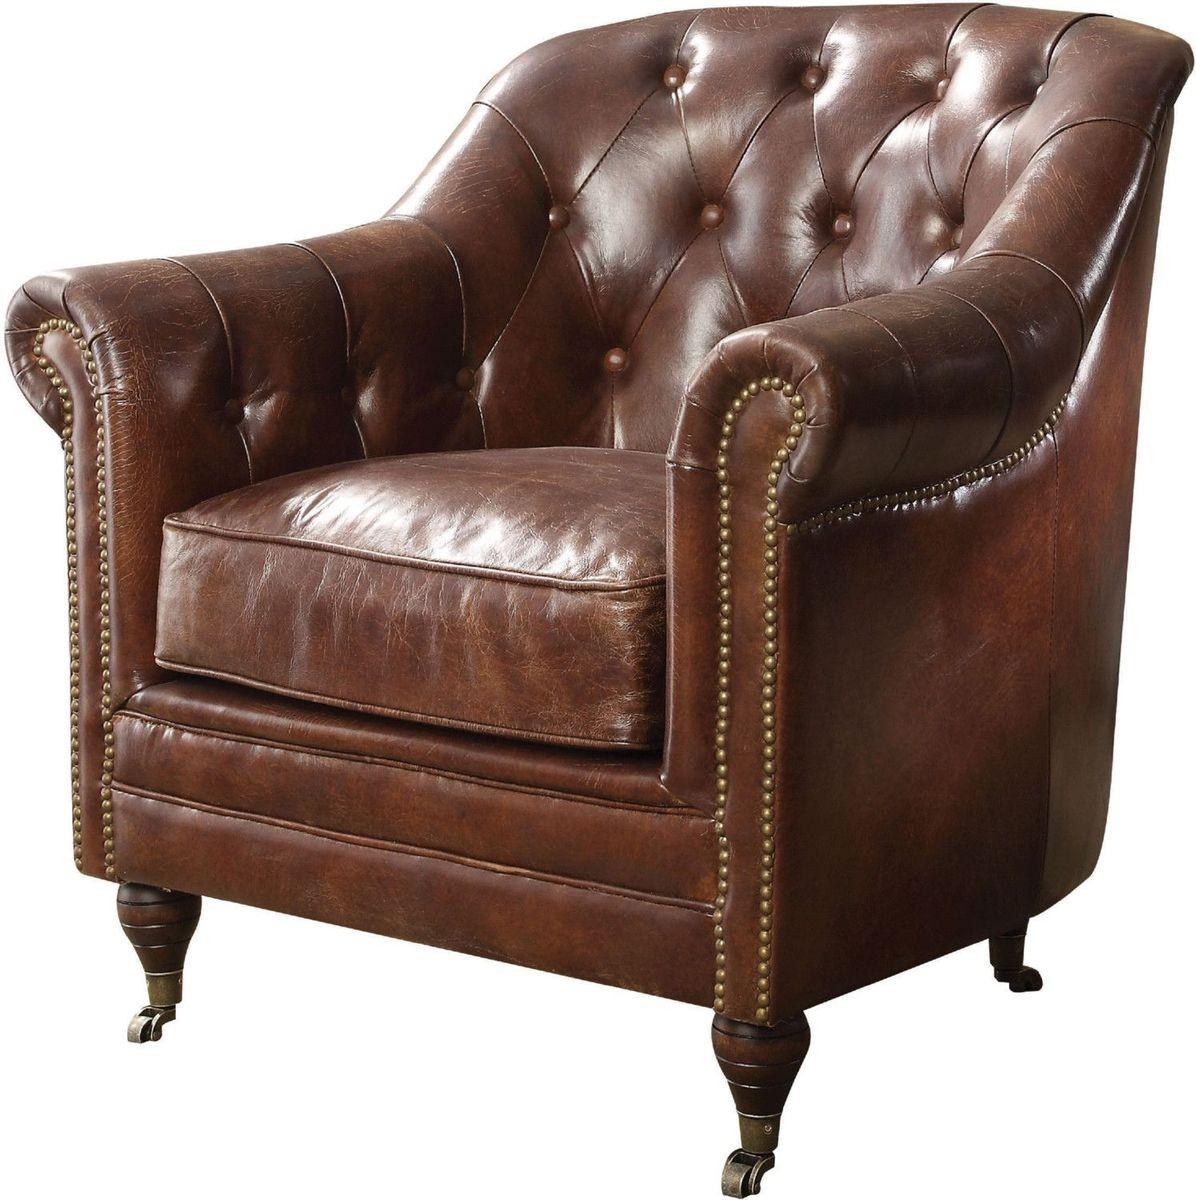 Classic, Traditional Accent Chair Aberdeen-53627 Aberdeen-53627 in Dark Brown Top grain leather